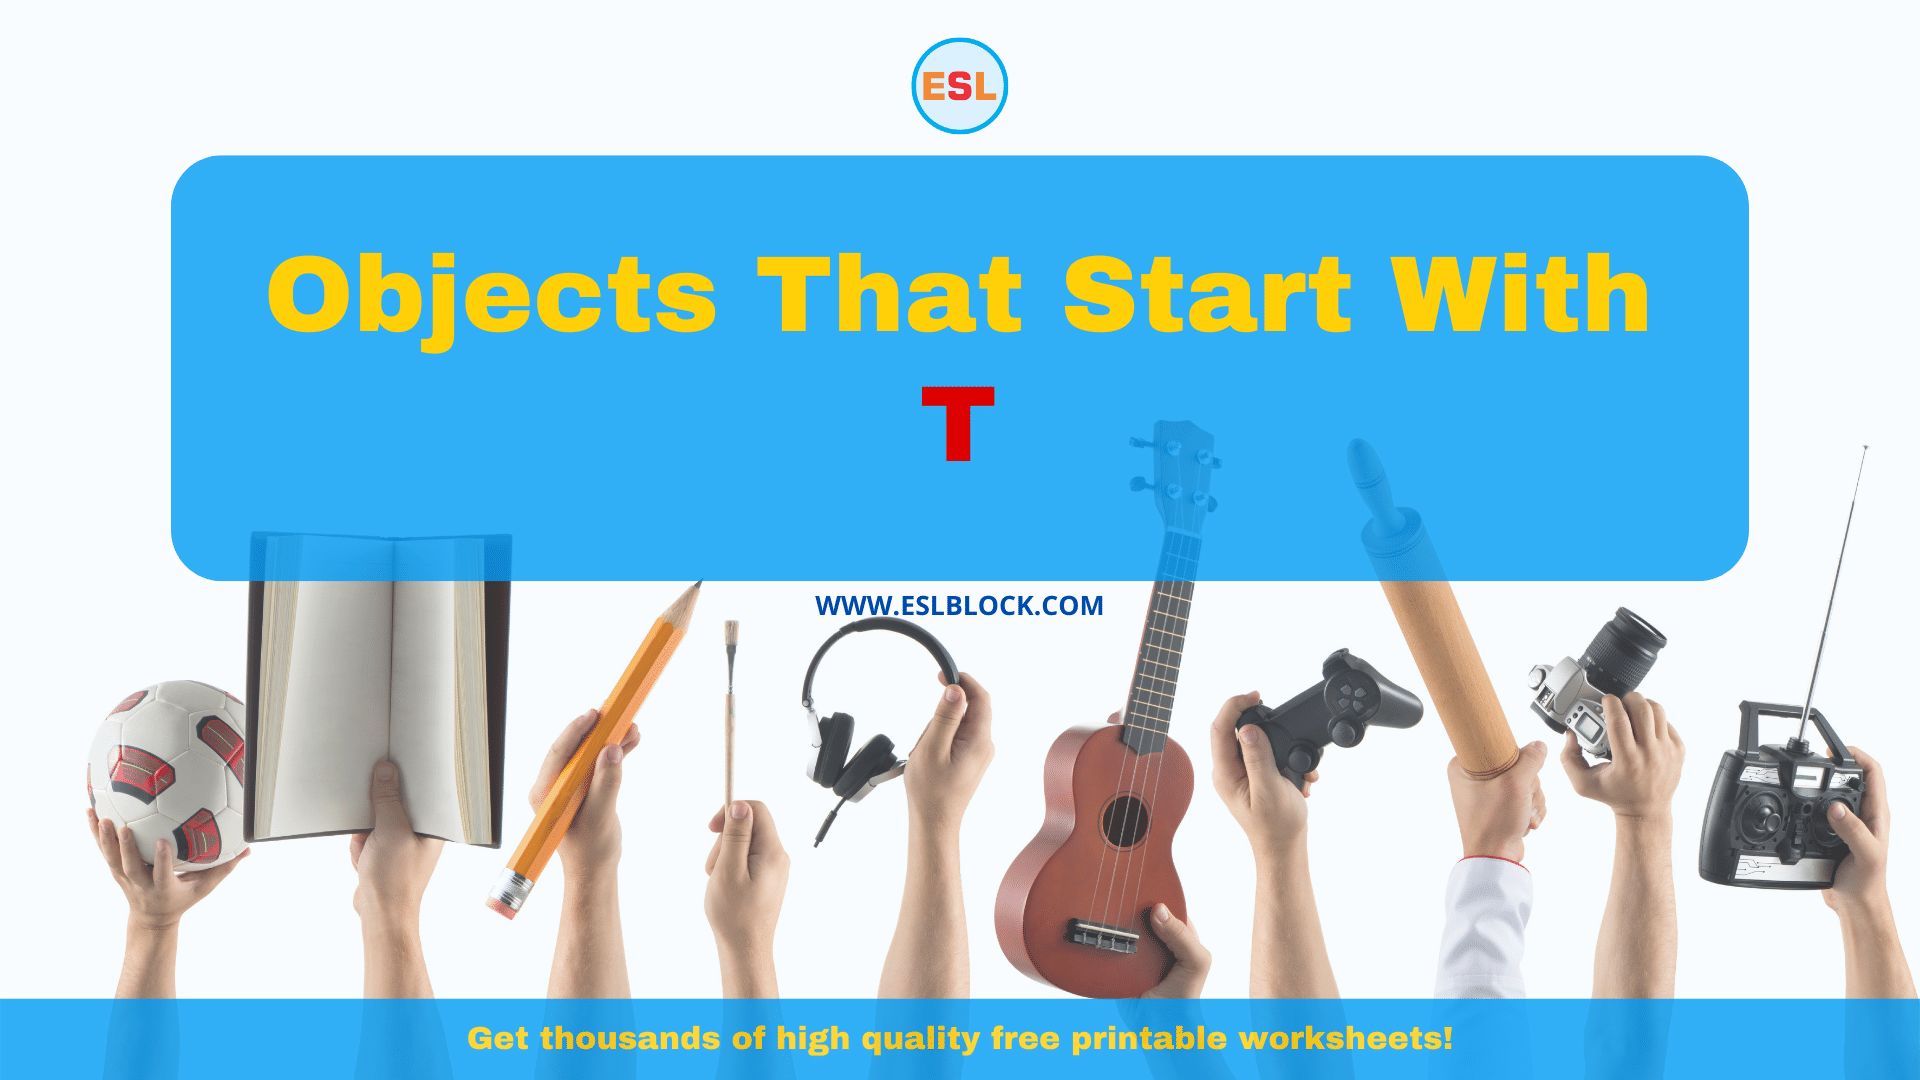 5 Letter Objects Starting With T, English, English Nouns, English Vocabulary, English Words, List of Objects That Start With T, Nouns, Objects List, Objects That Start With T, T Objects, T Objects in English, T Objects Names, Things Names, Vocabulary